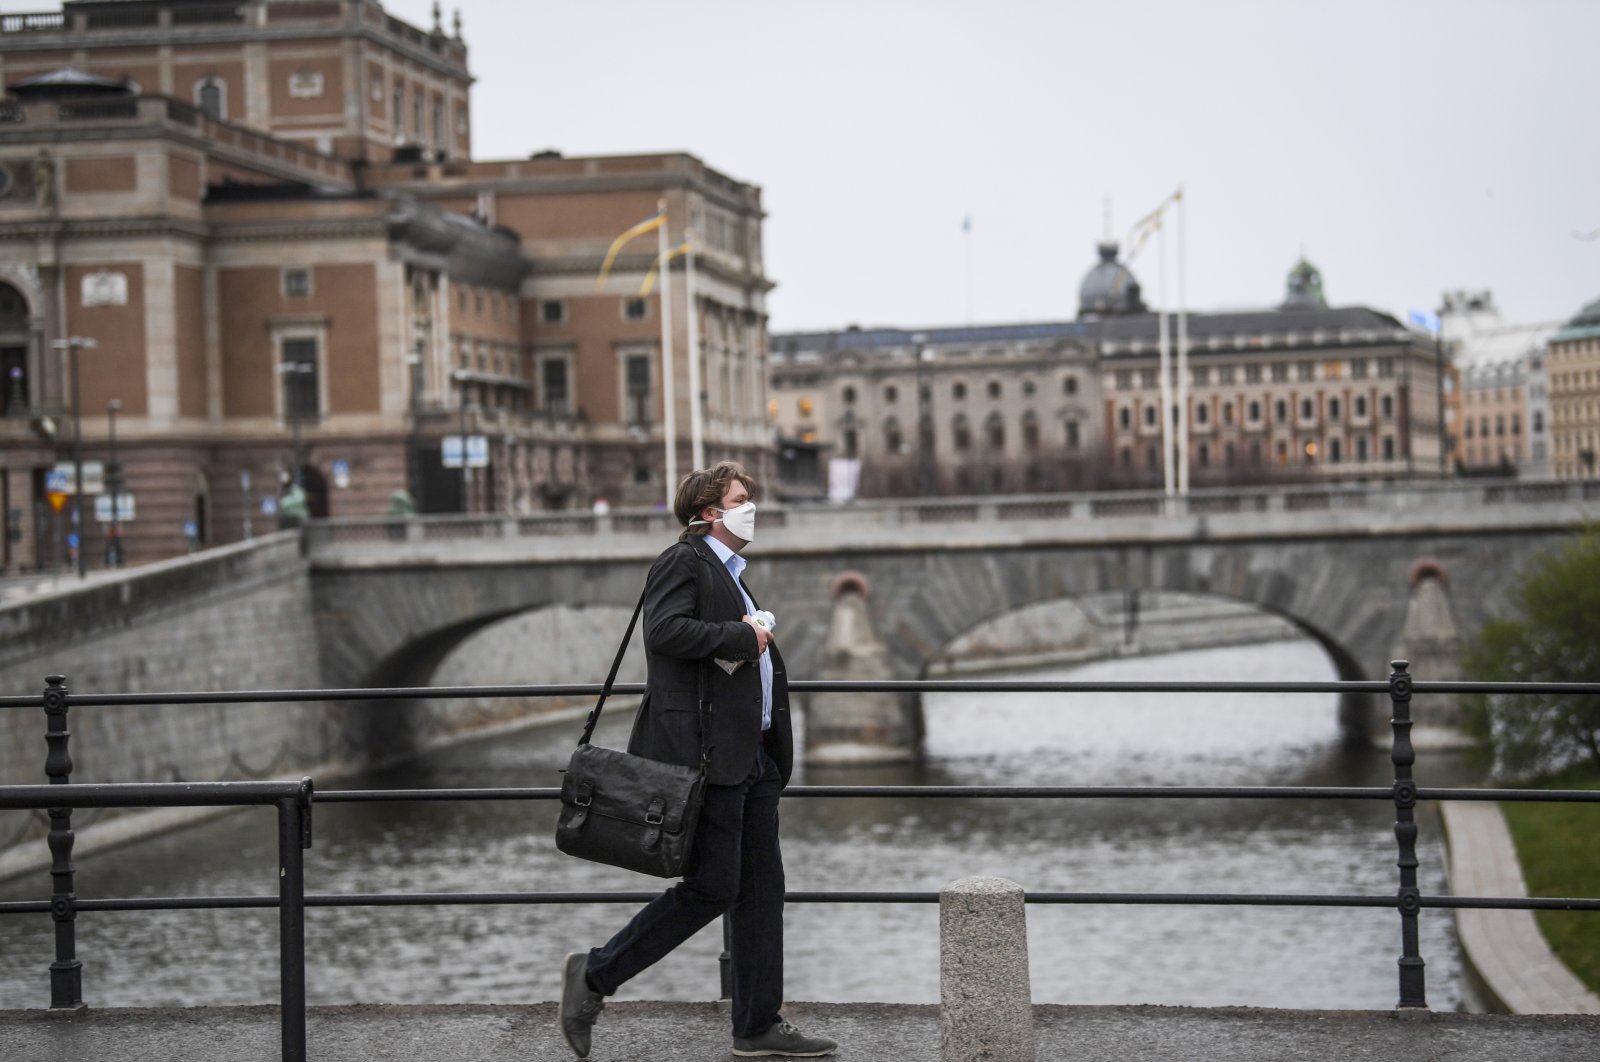 A man wearing a protective mask walks in the rain past the Royal Swedish Opera (at left) in Stockholm, Sweden, 27 April 2020, amid the coronavirus disease (COVID-19) outbreak.  (EPA-EFE Photo)